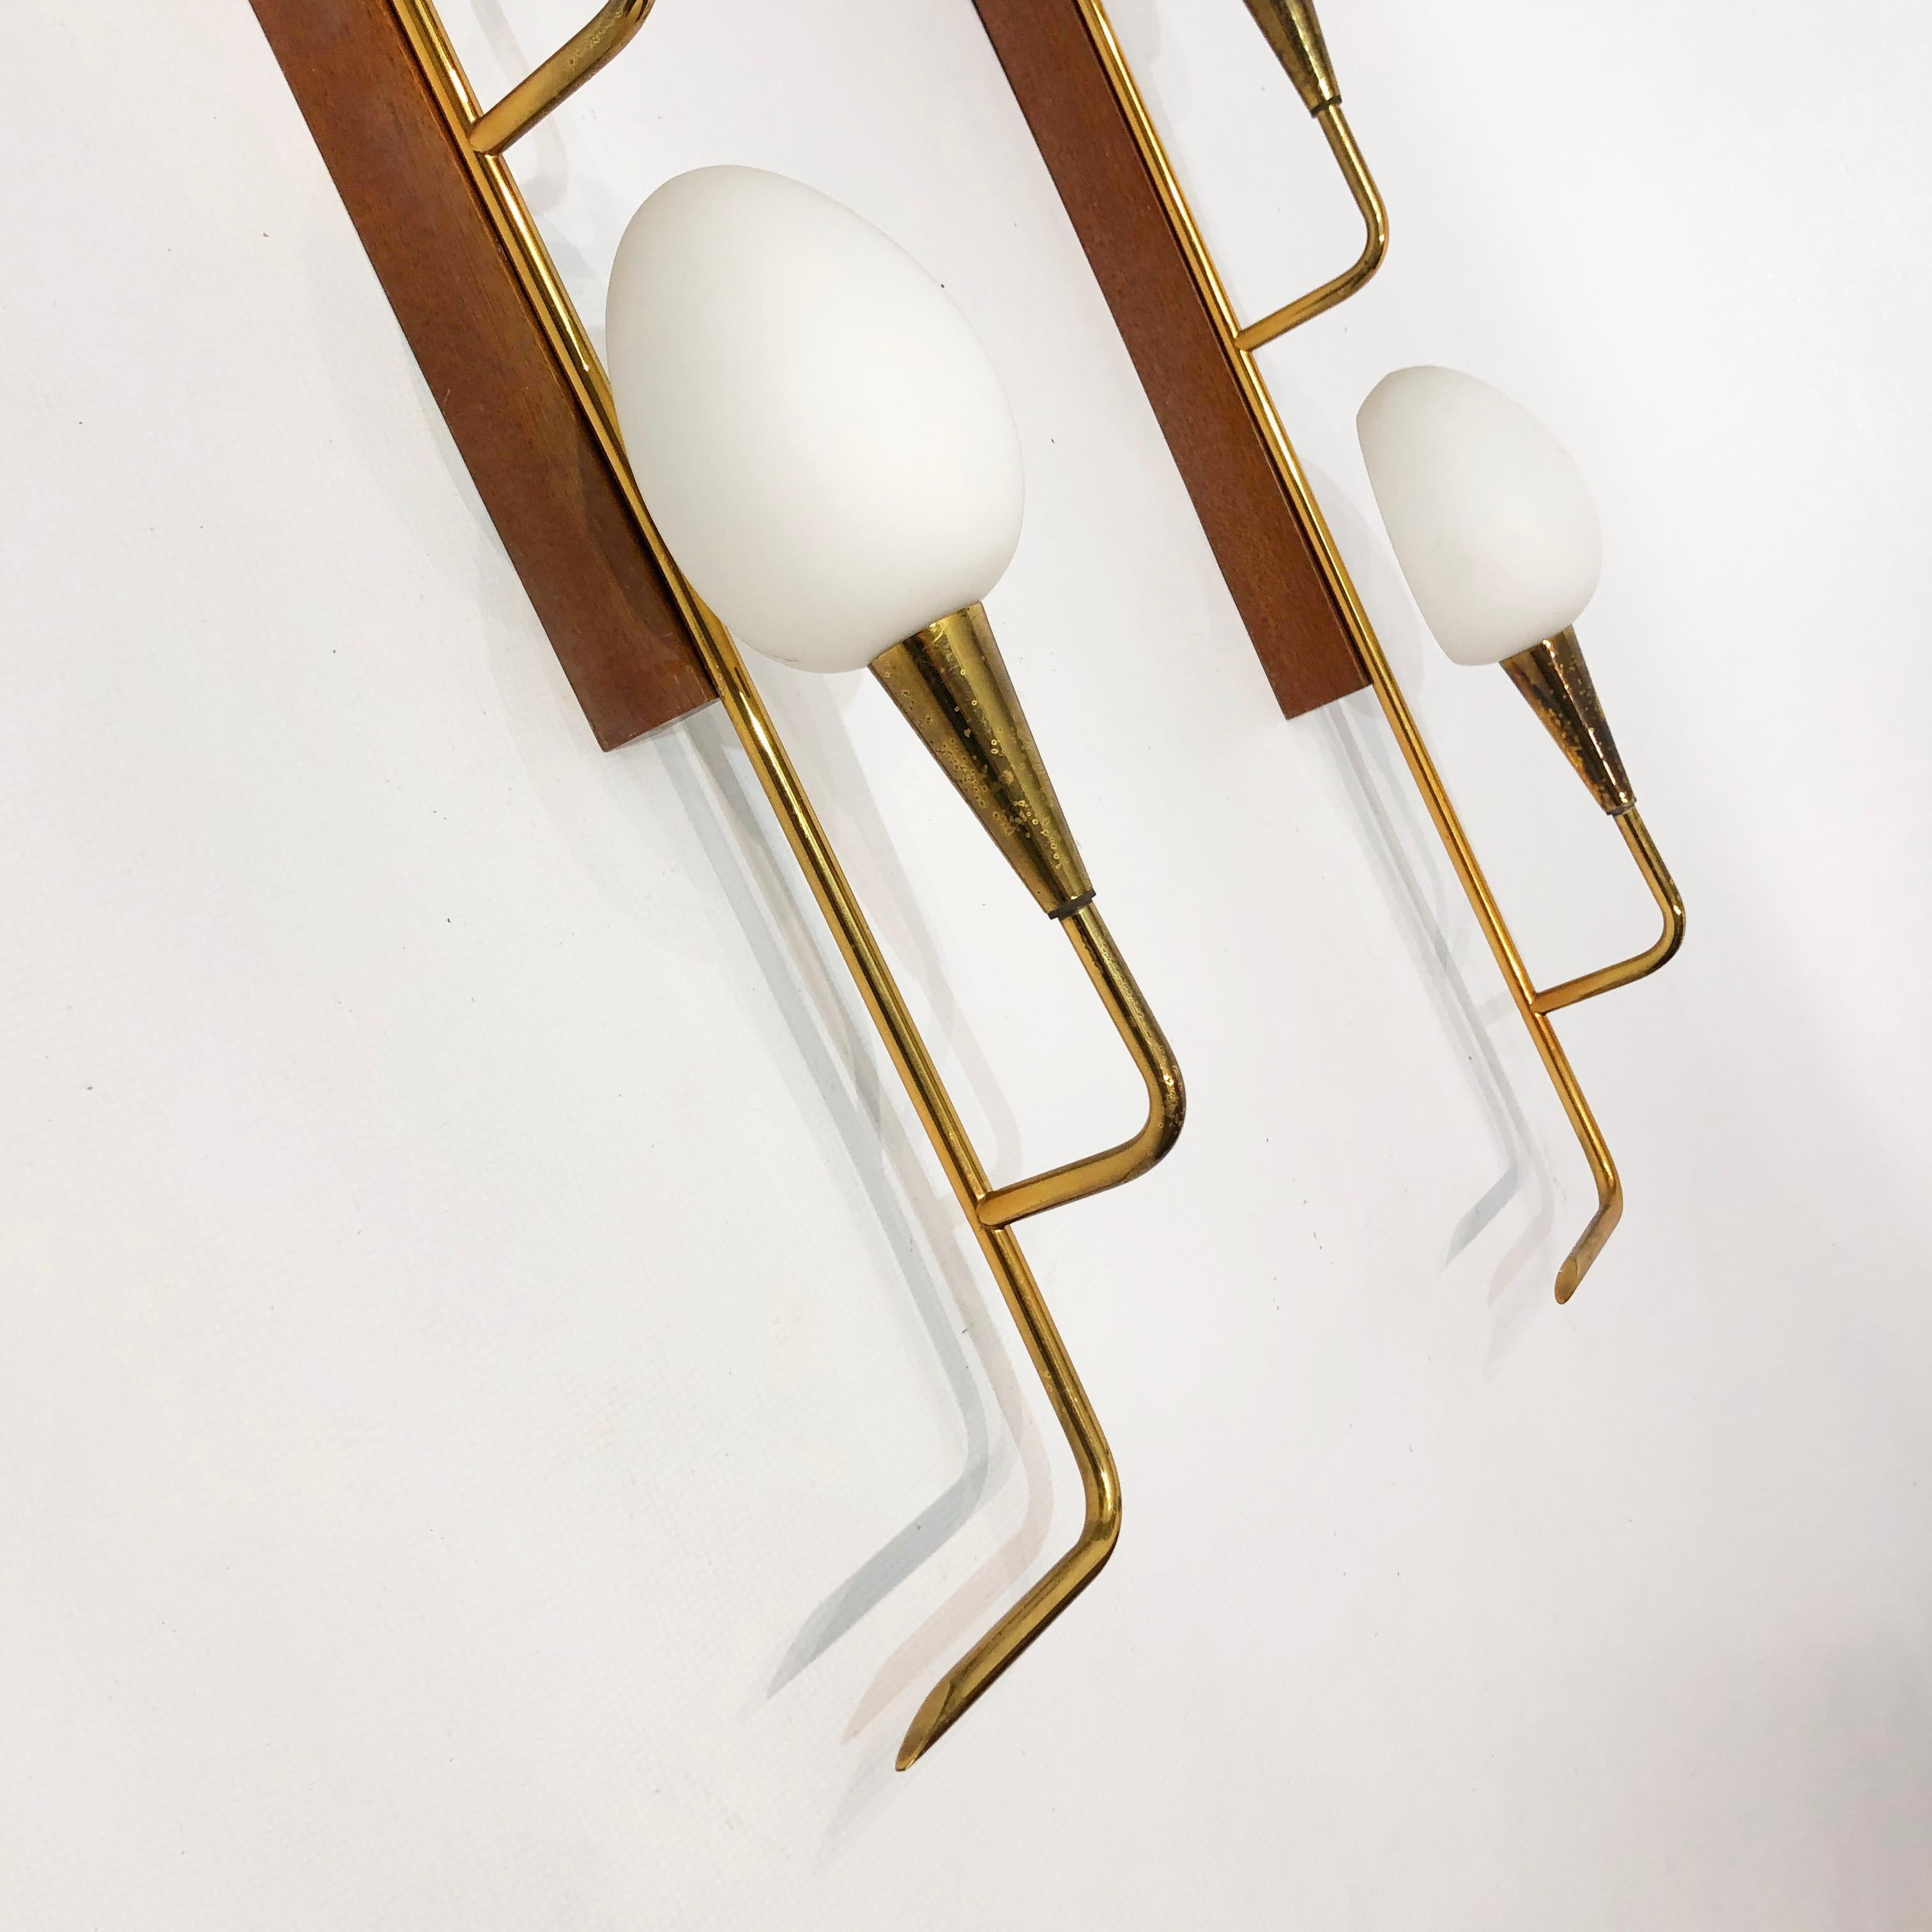 Maison Lunel Pair Of Mid-Century  Teak And Brass Wall Lights 1950s For Sale 3